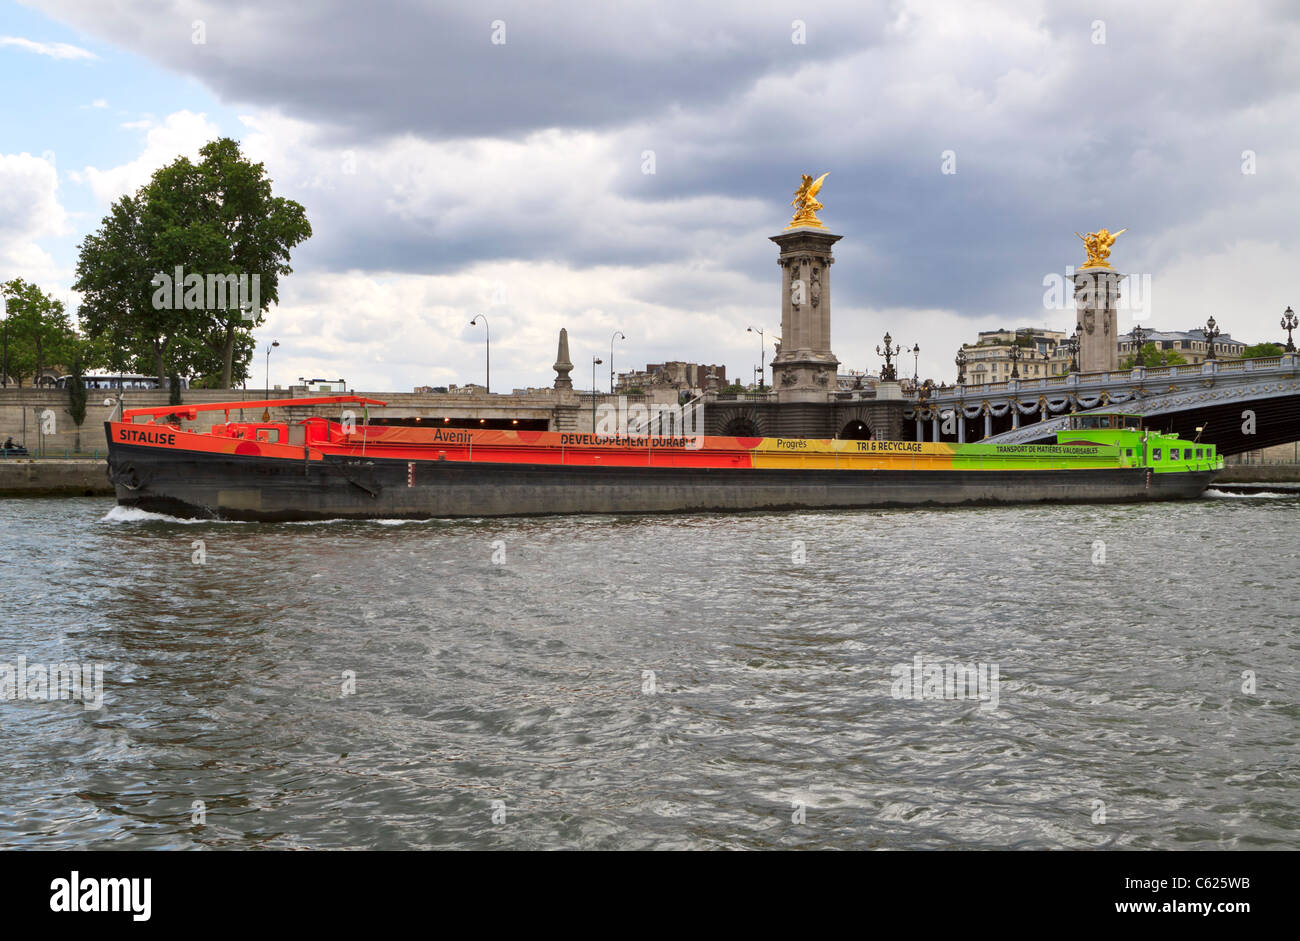 Inland Dry Cargo Vessel Sitalise on the River Seine in Paris. Recyclables are transported to recovery plants via river barge. Stock Photo